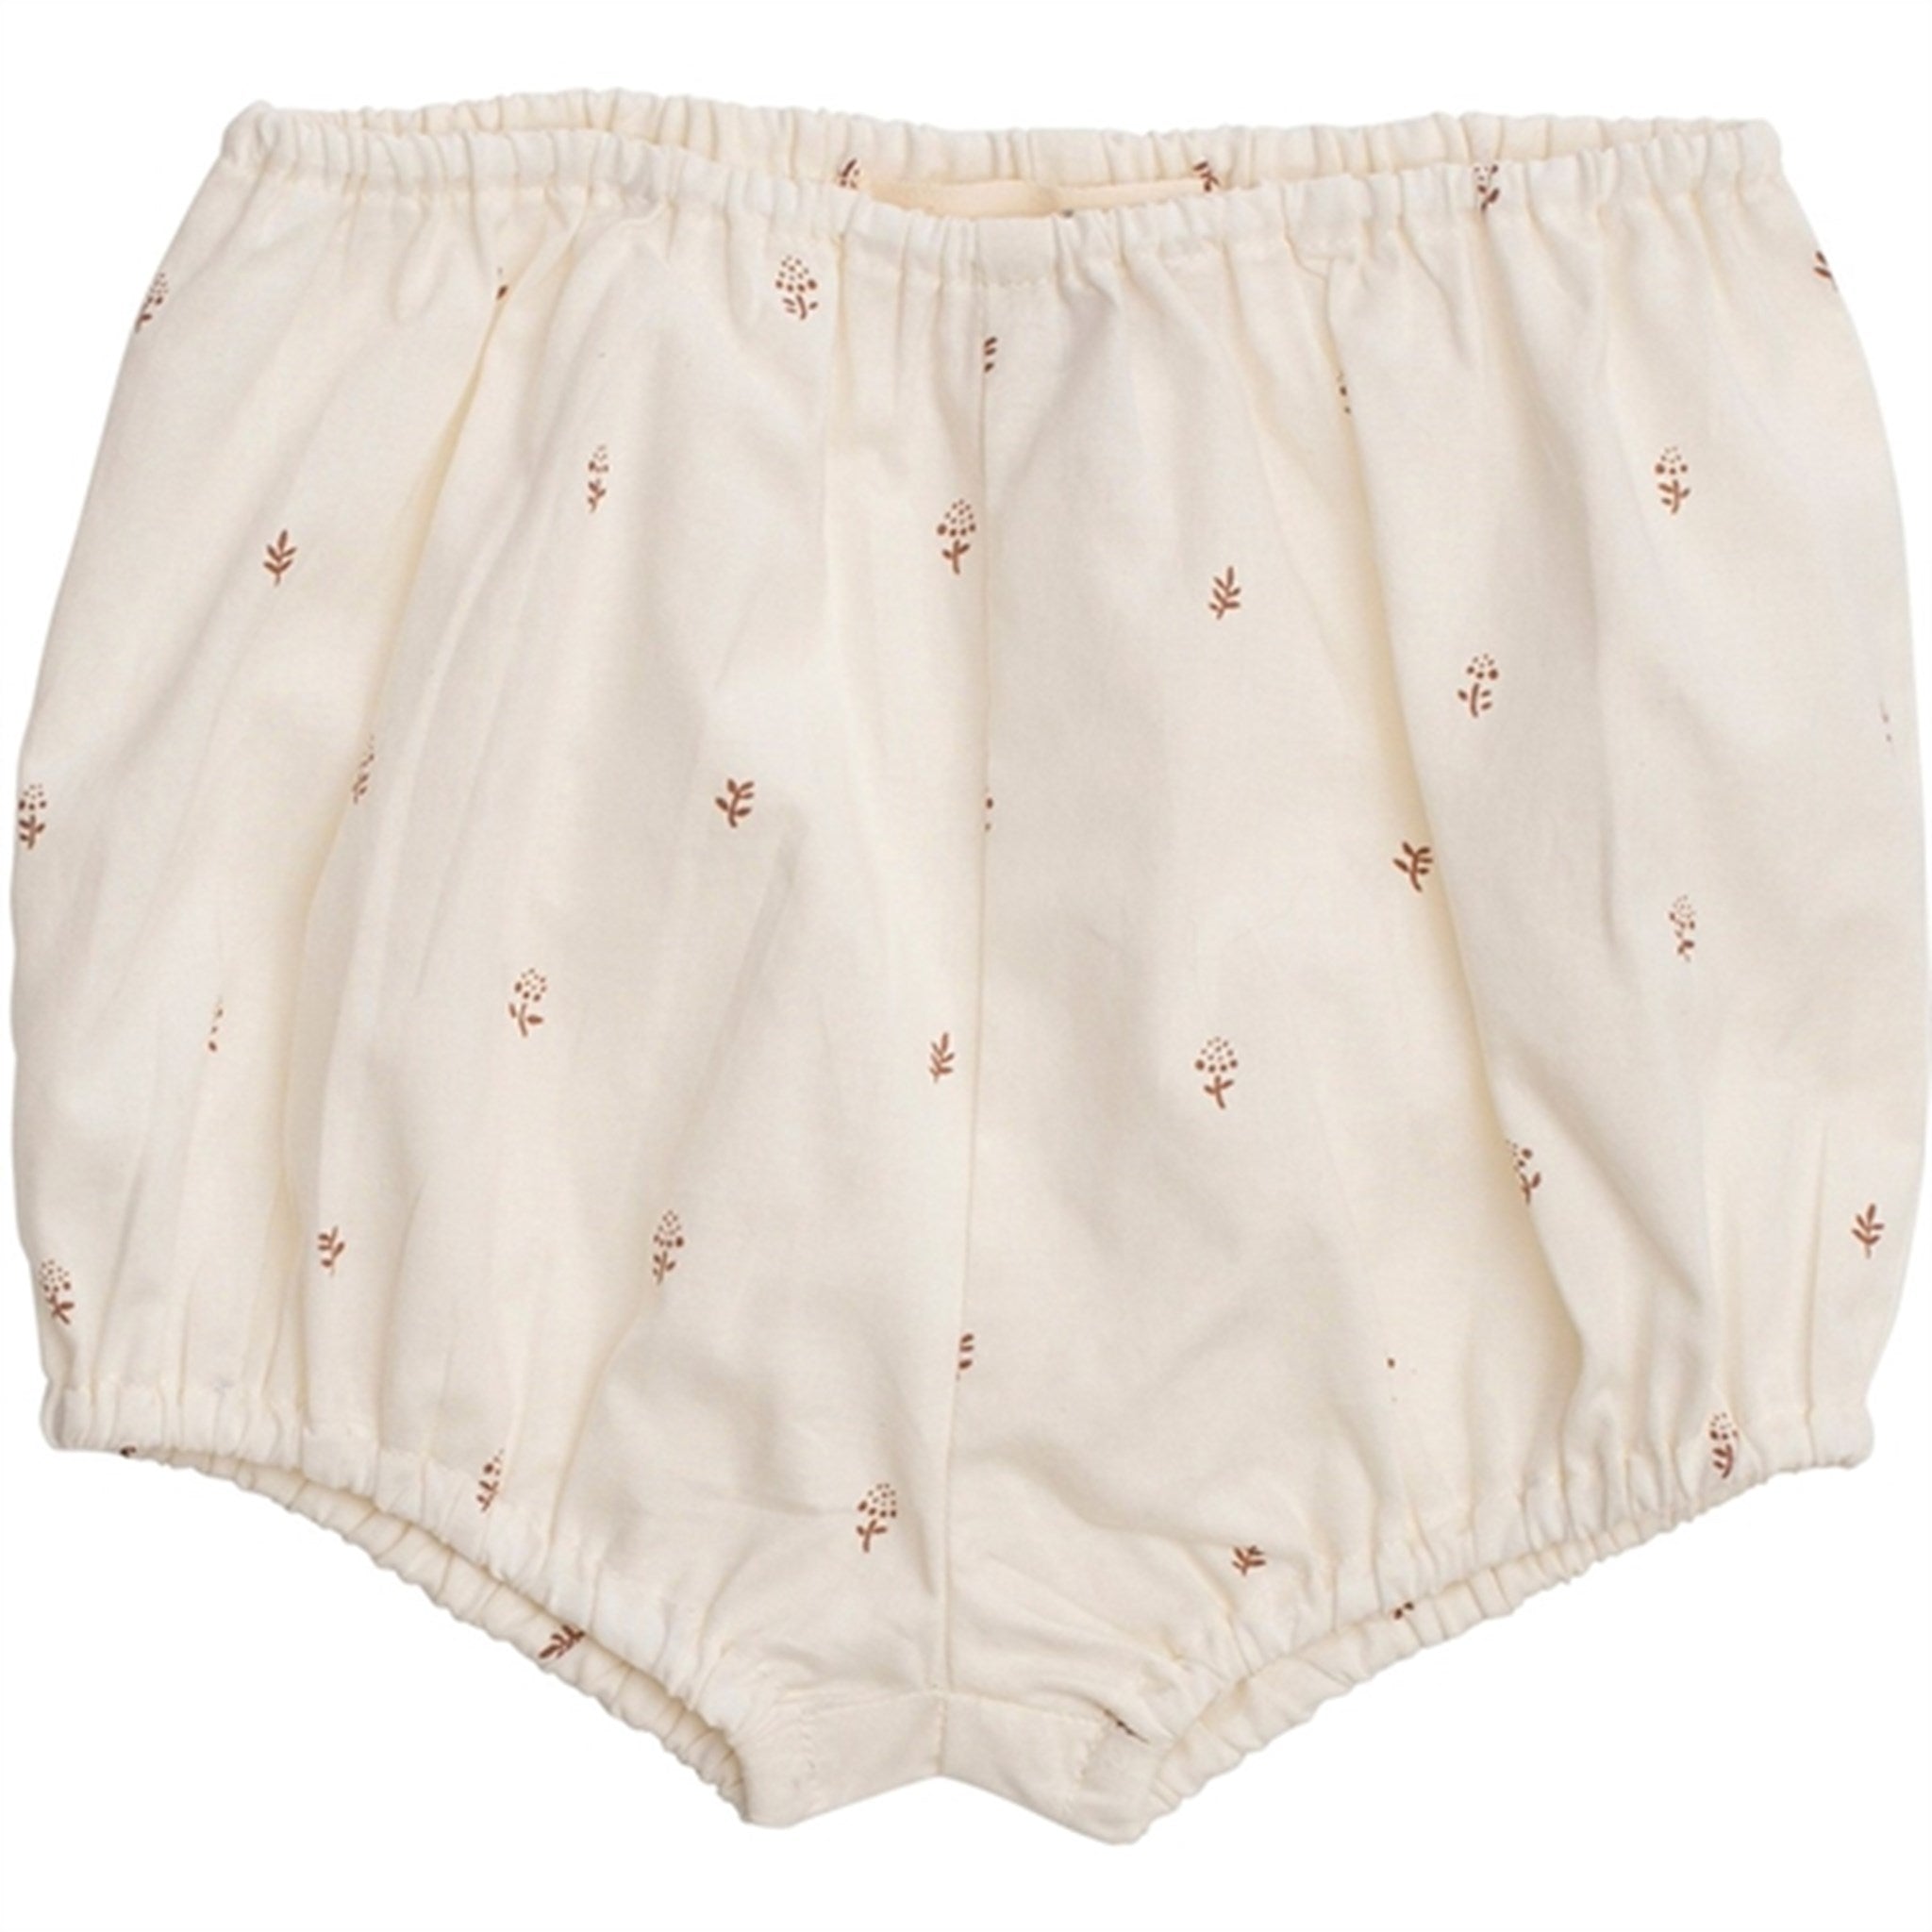 Serendipity Aster Baby Bloomers